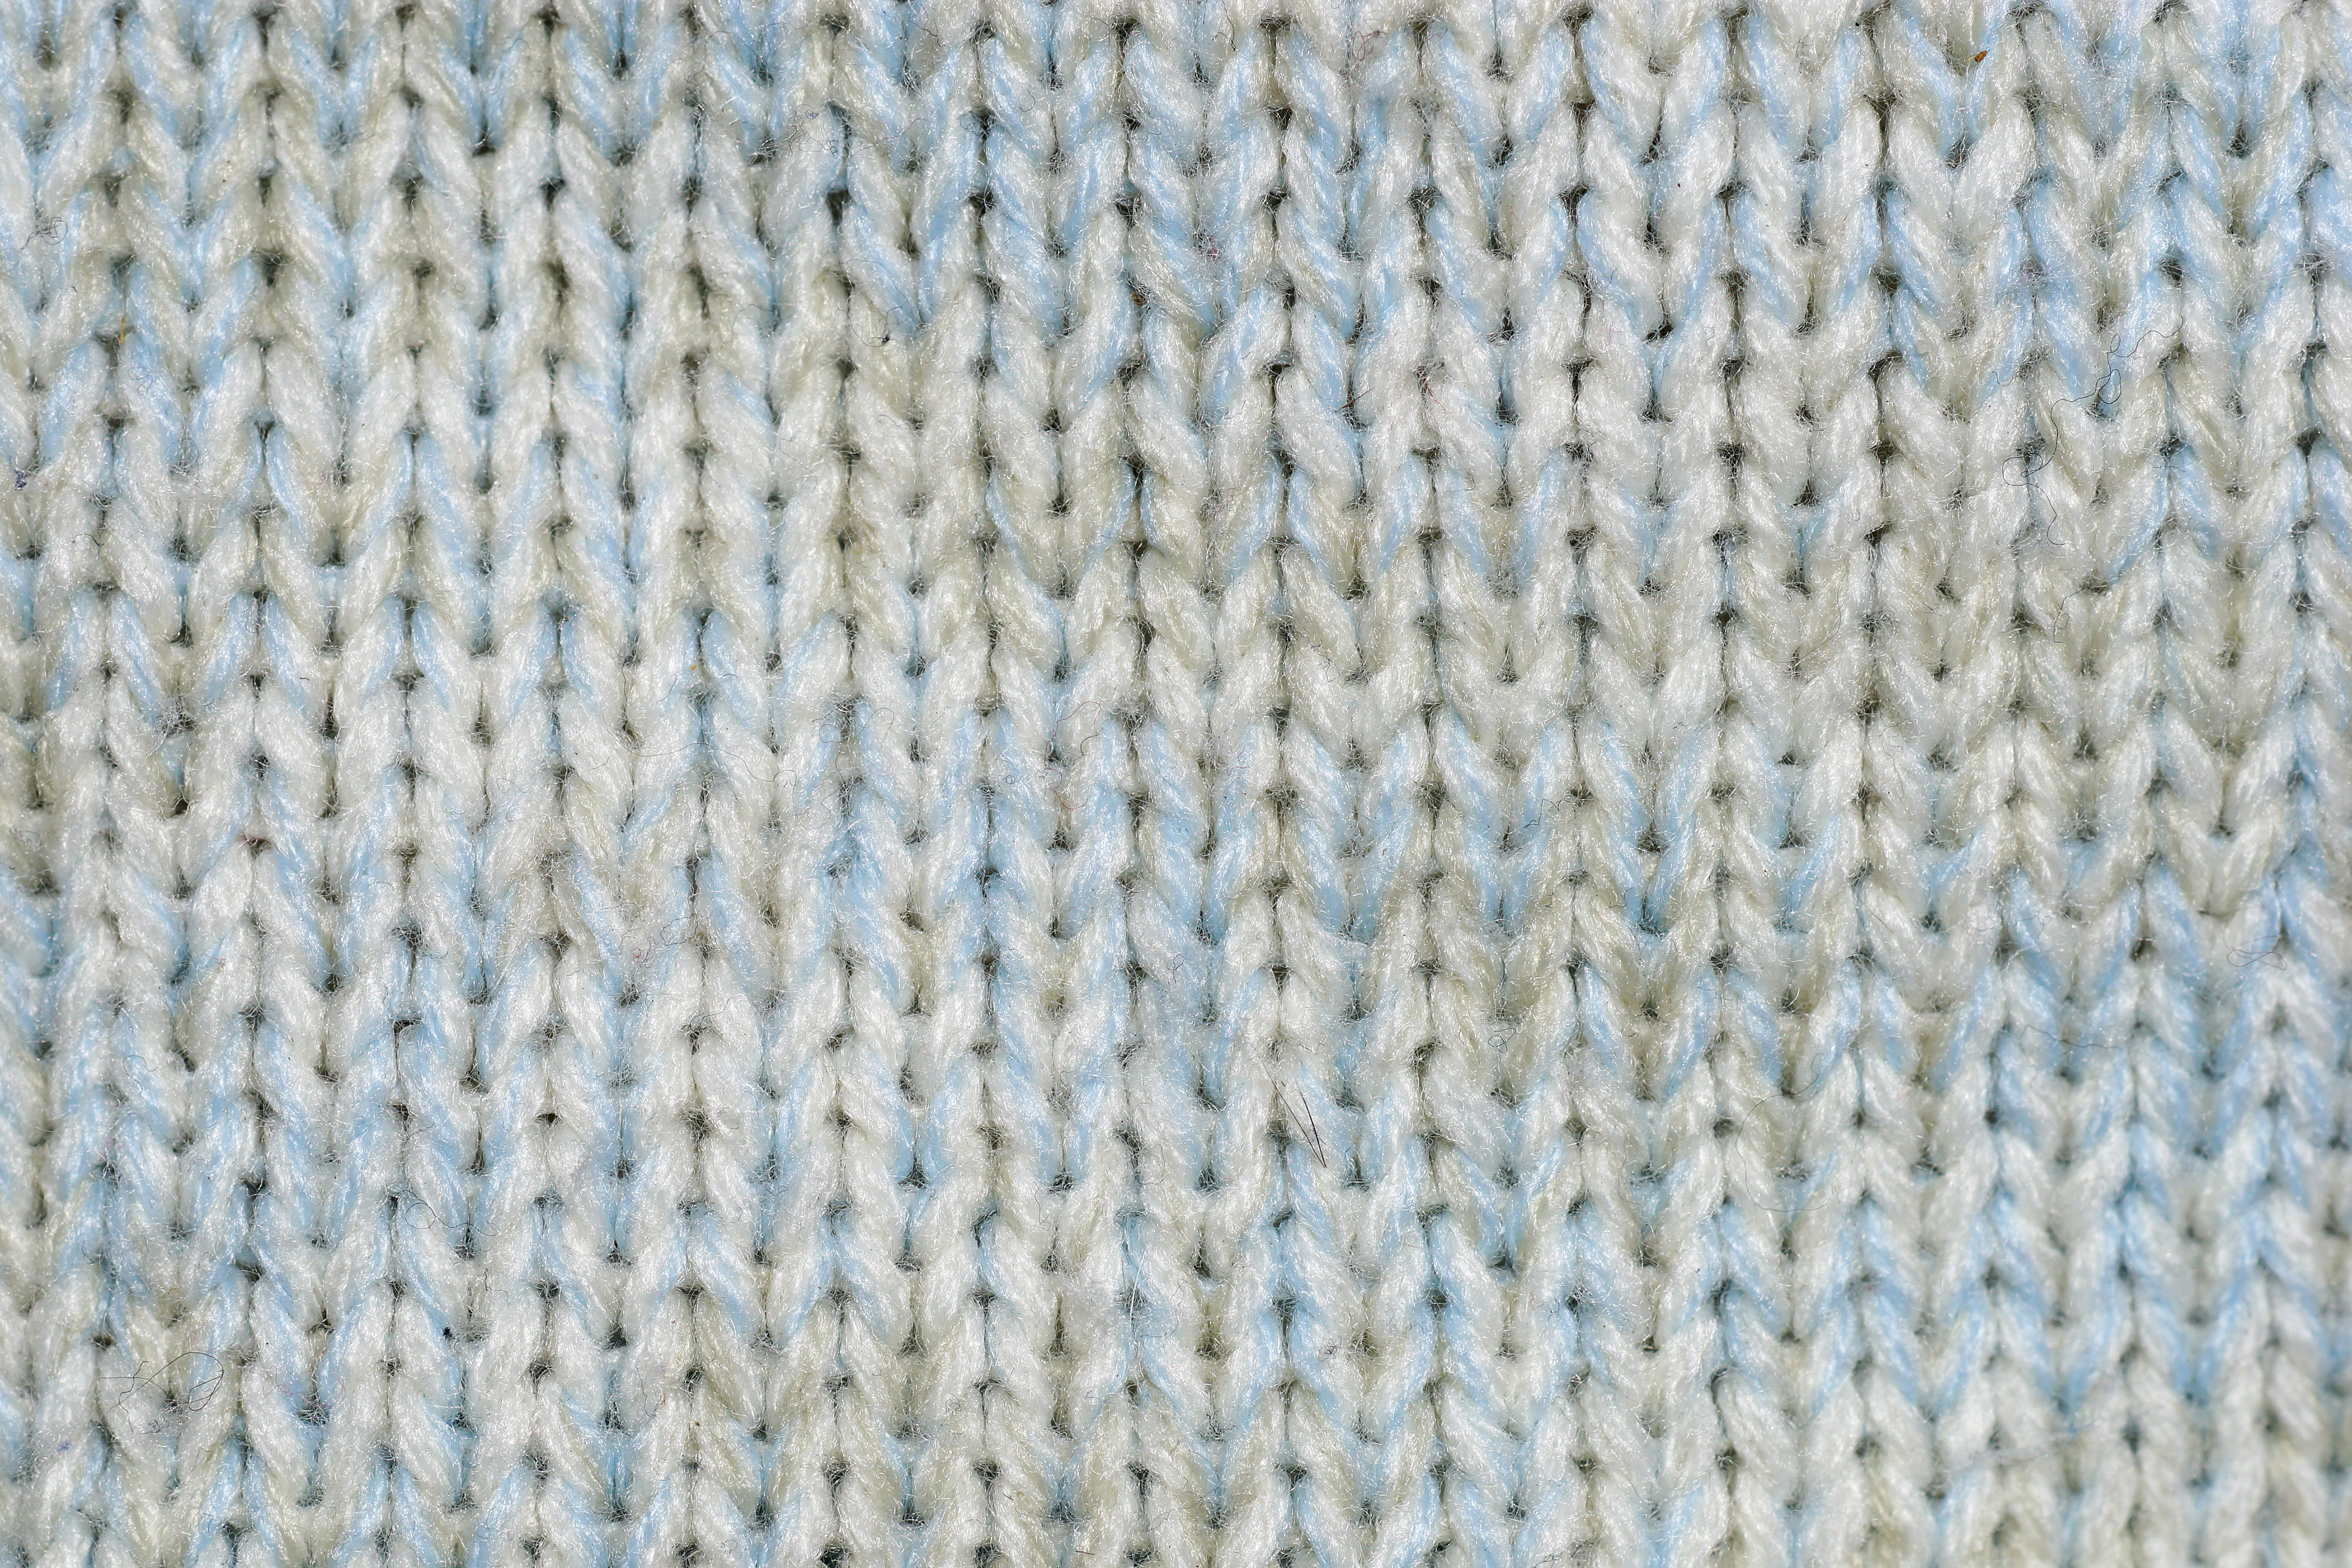 Simple wool texture knit fabric | www.myfreetextures.com | Free ...